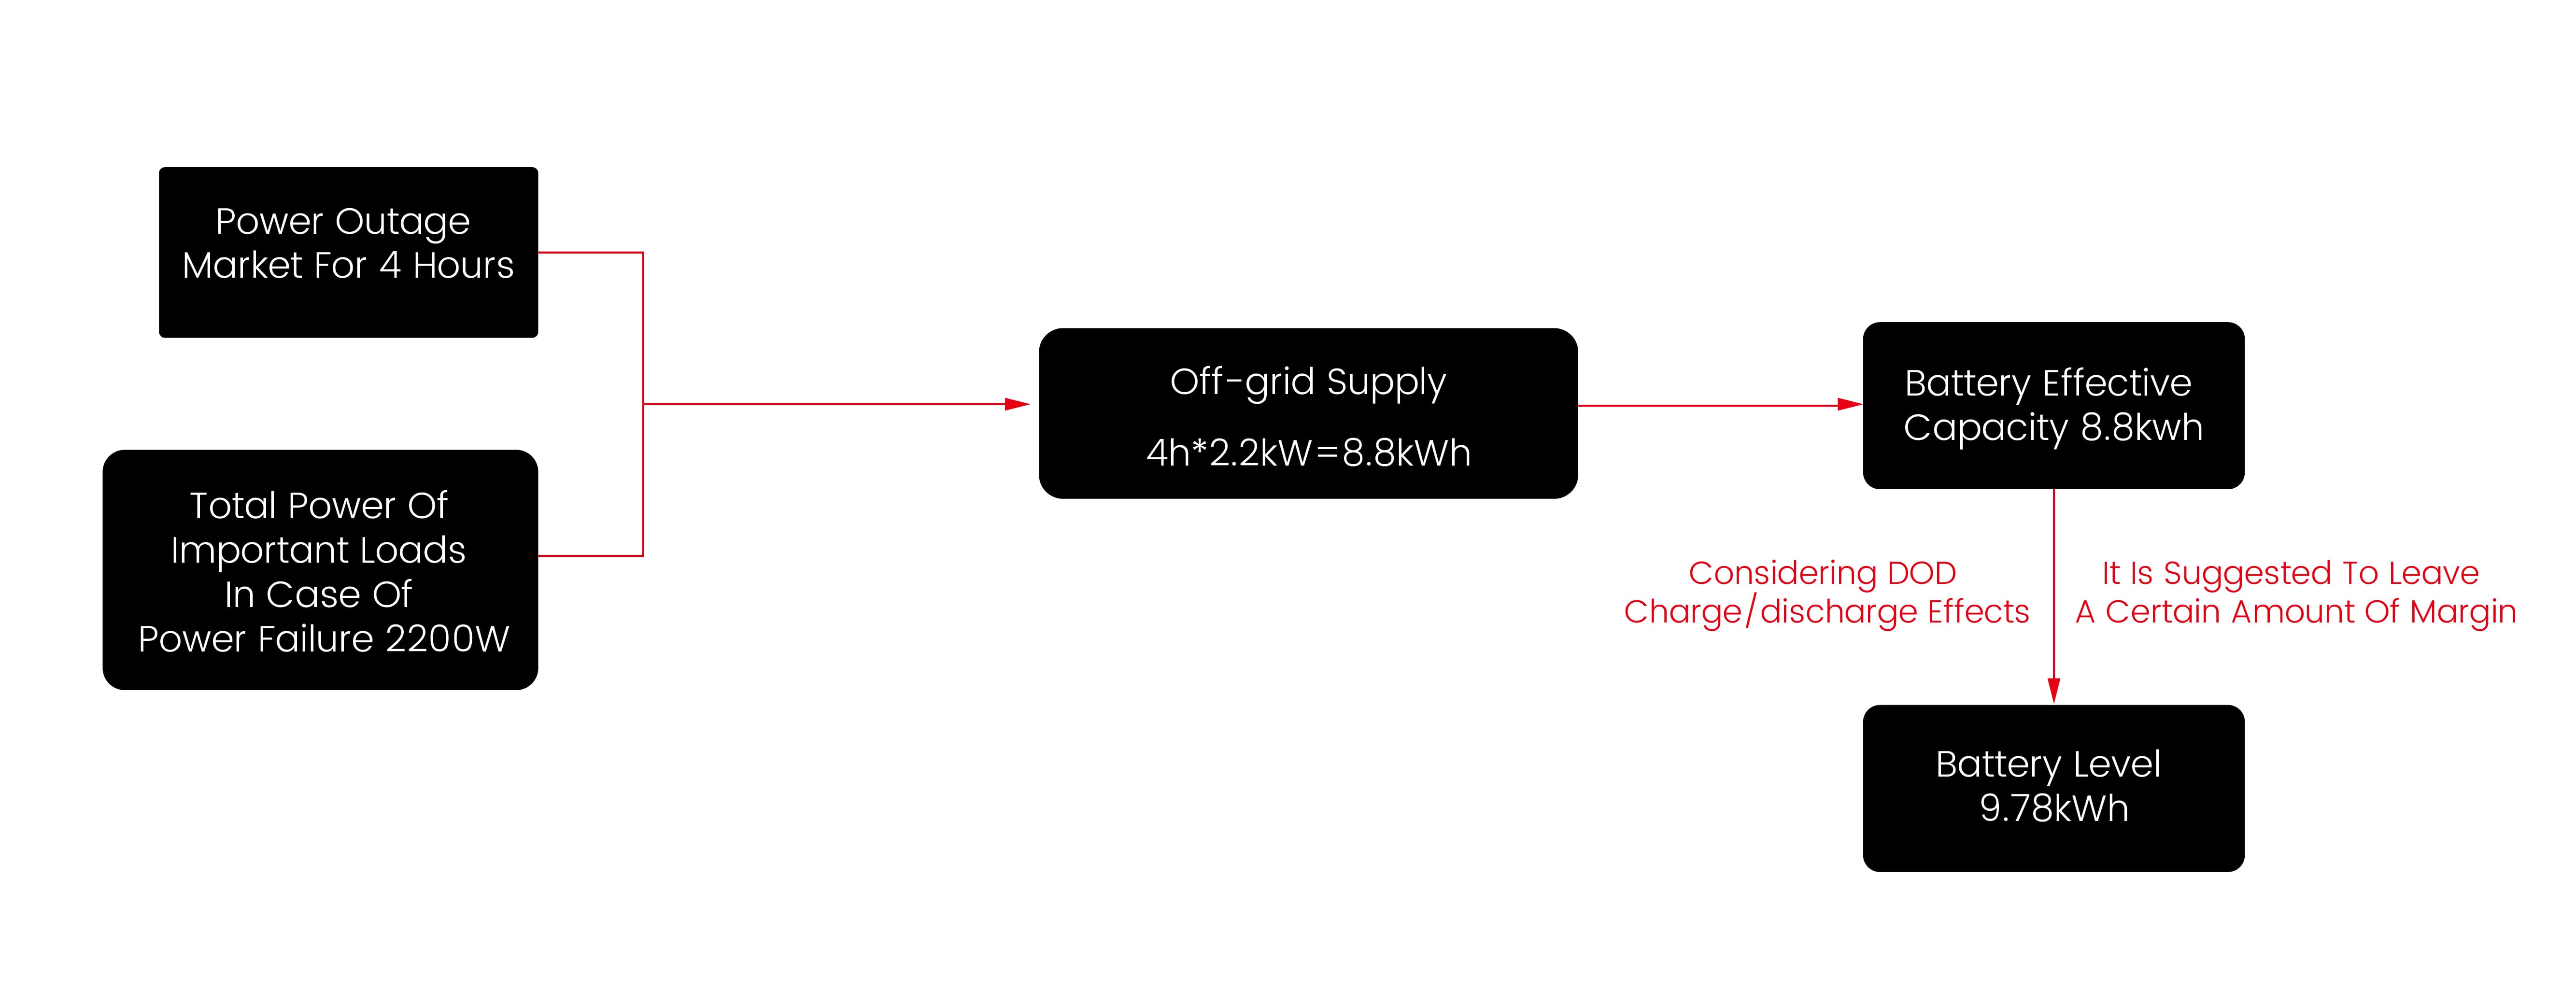 Grid instability area - Backup power supply